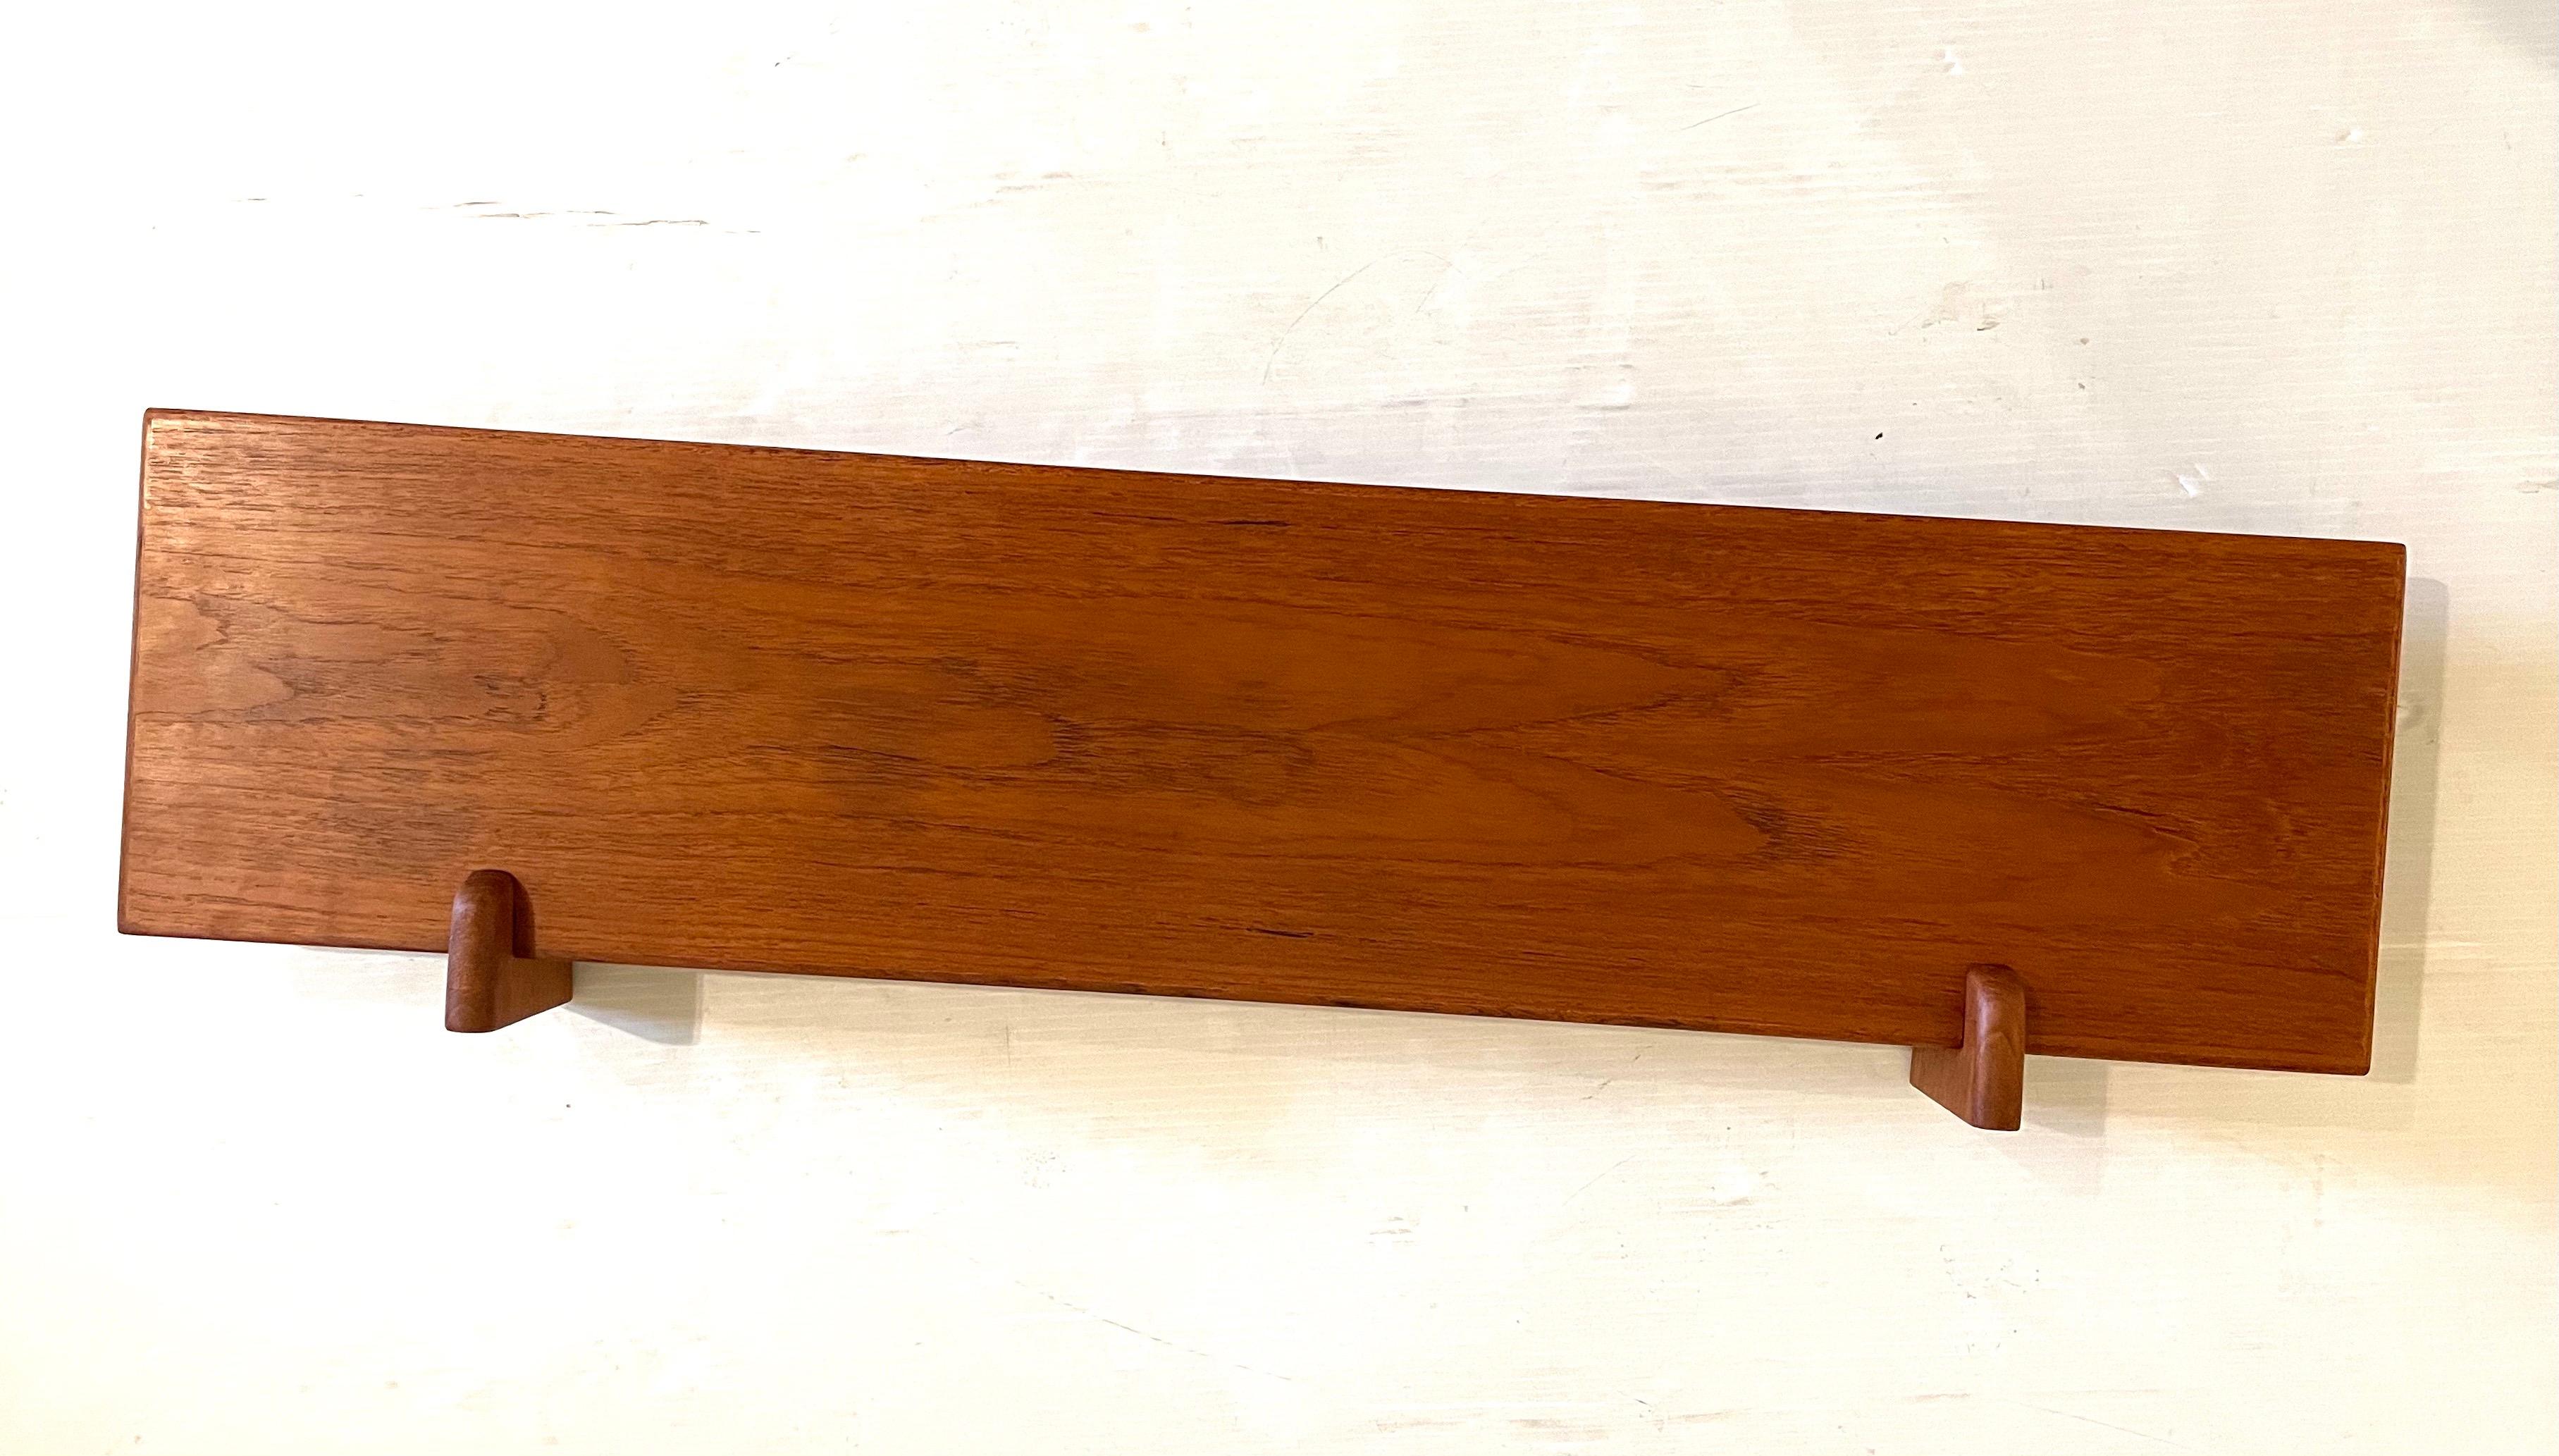 beautiful simple design well crafted floating shelf designed by Aksel Kjersgaard , circa 1950's we have oiled and cleaned the piece, beautiful dovetail drawer, and easy to install as shown.